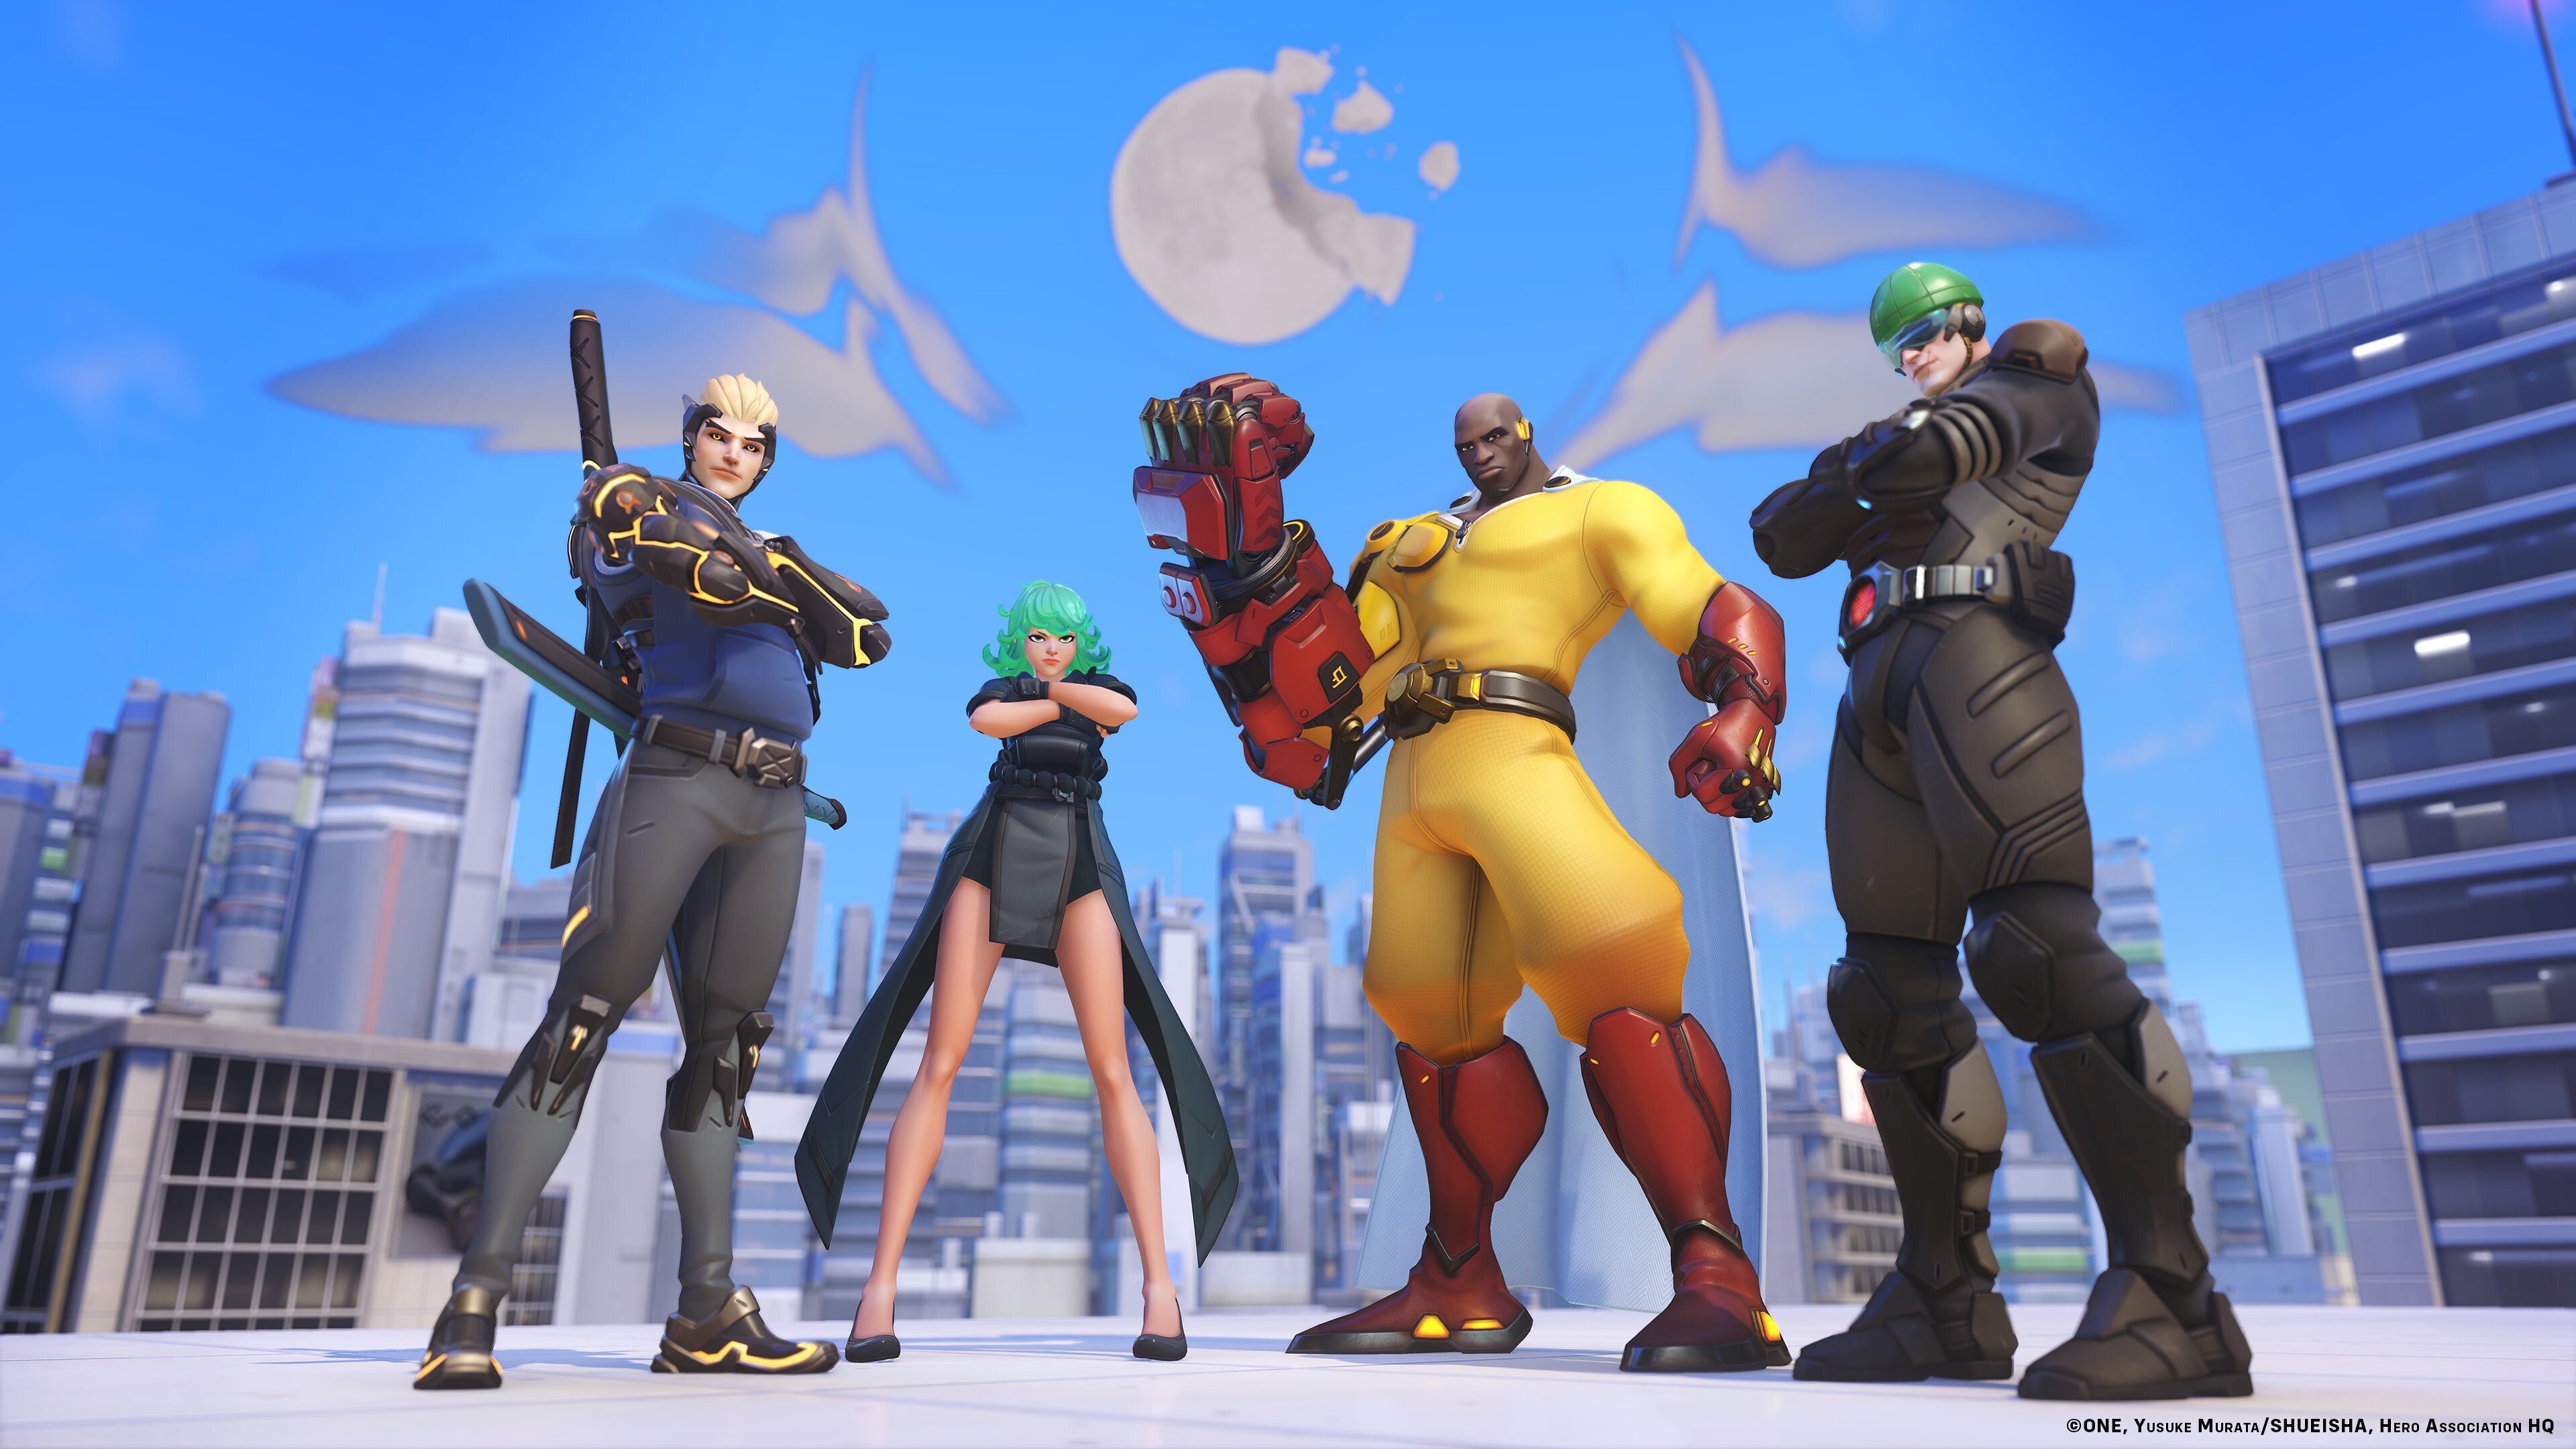 Overwatch 2 One Punch Man Crossover - All Cosmetics, Challenges